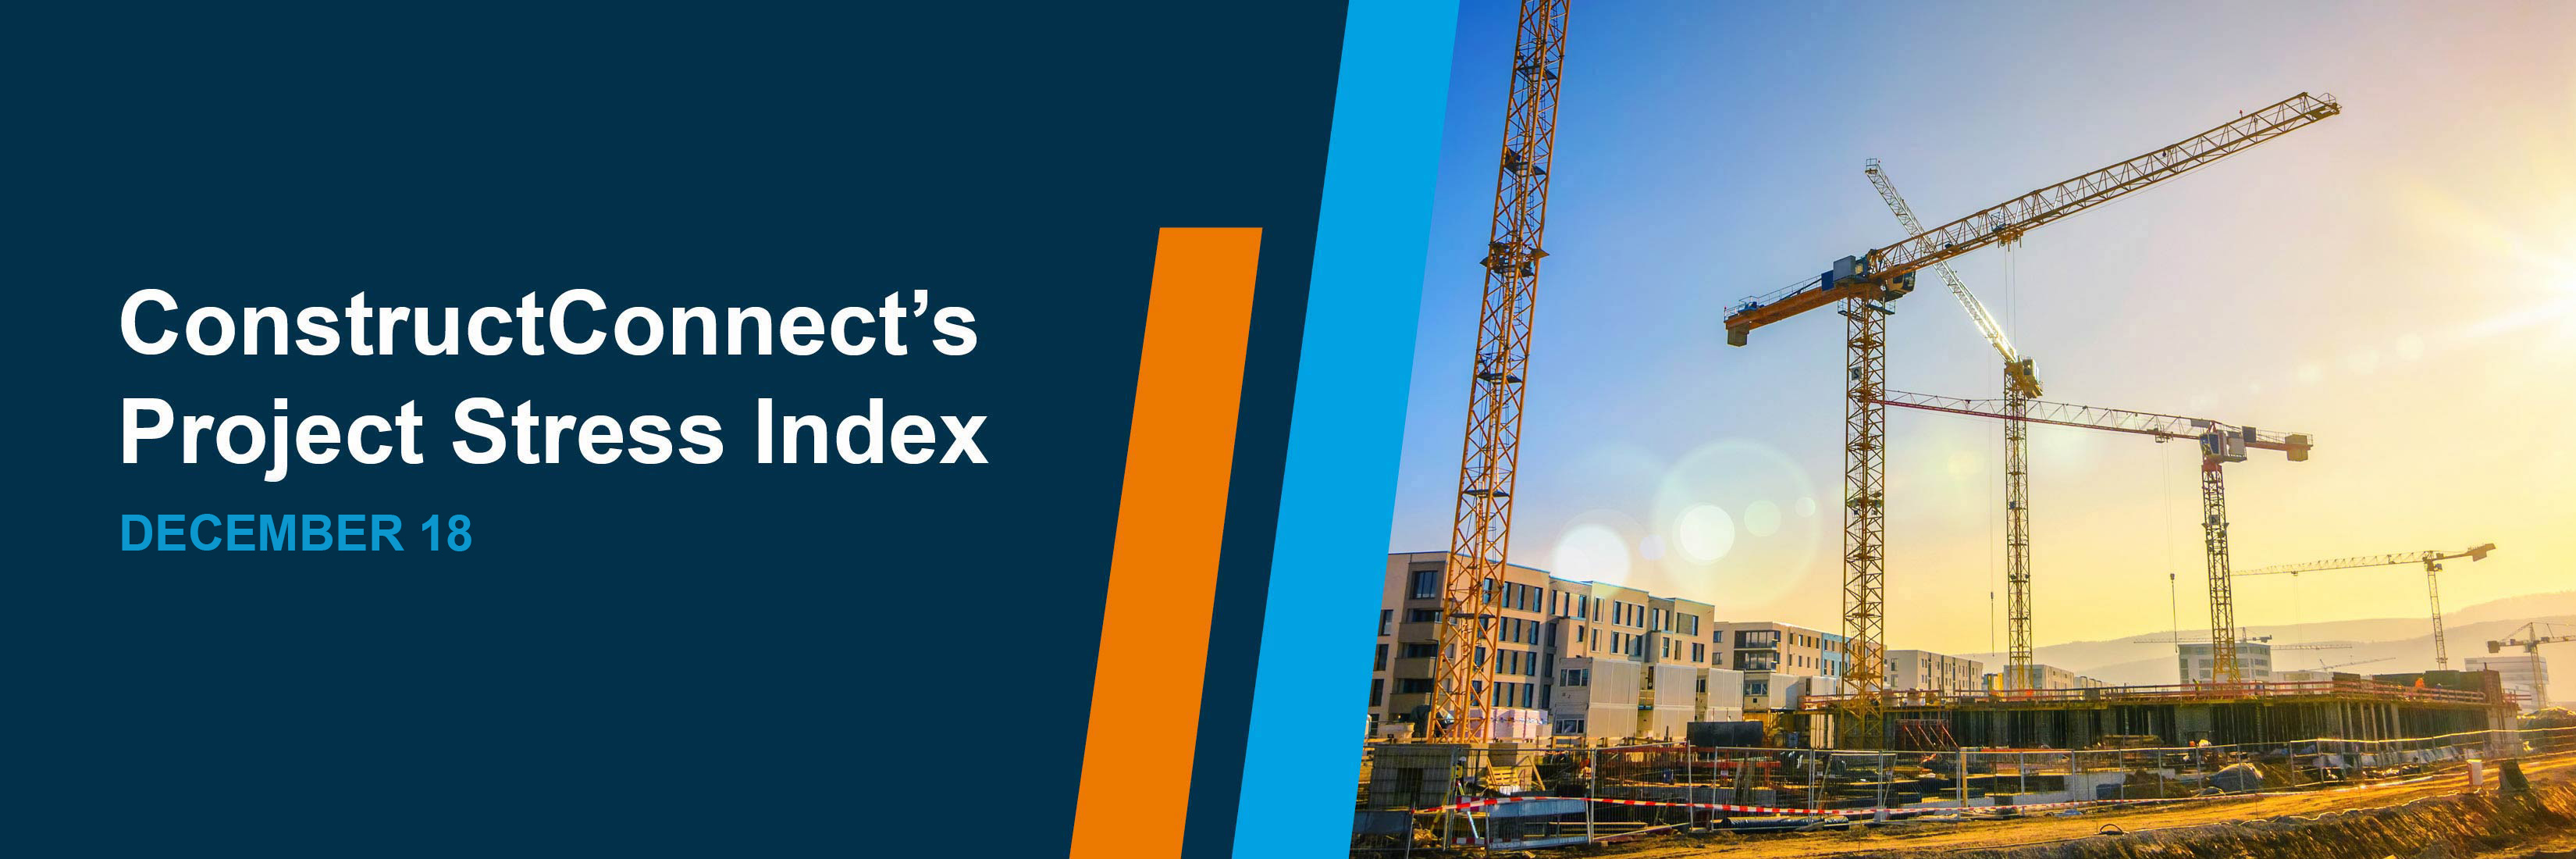 ConstructConnect's Project Stress Index - December 18